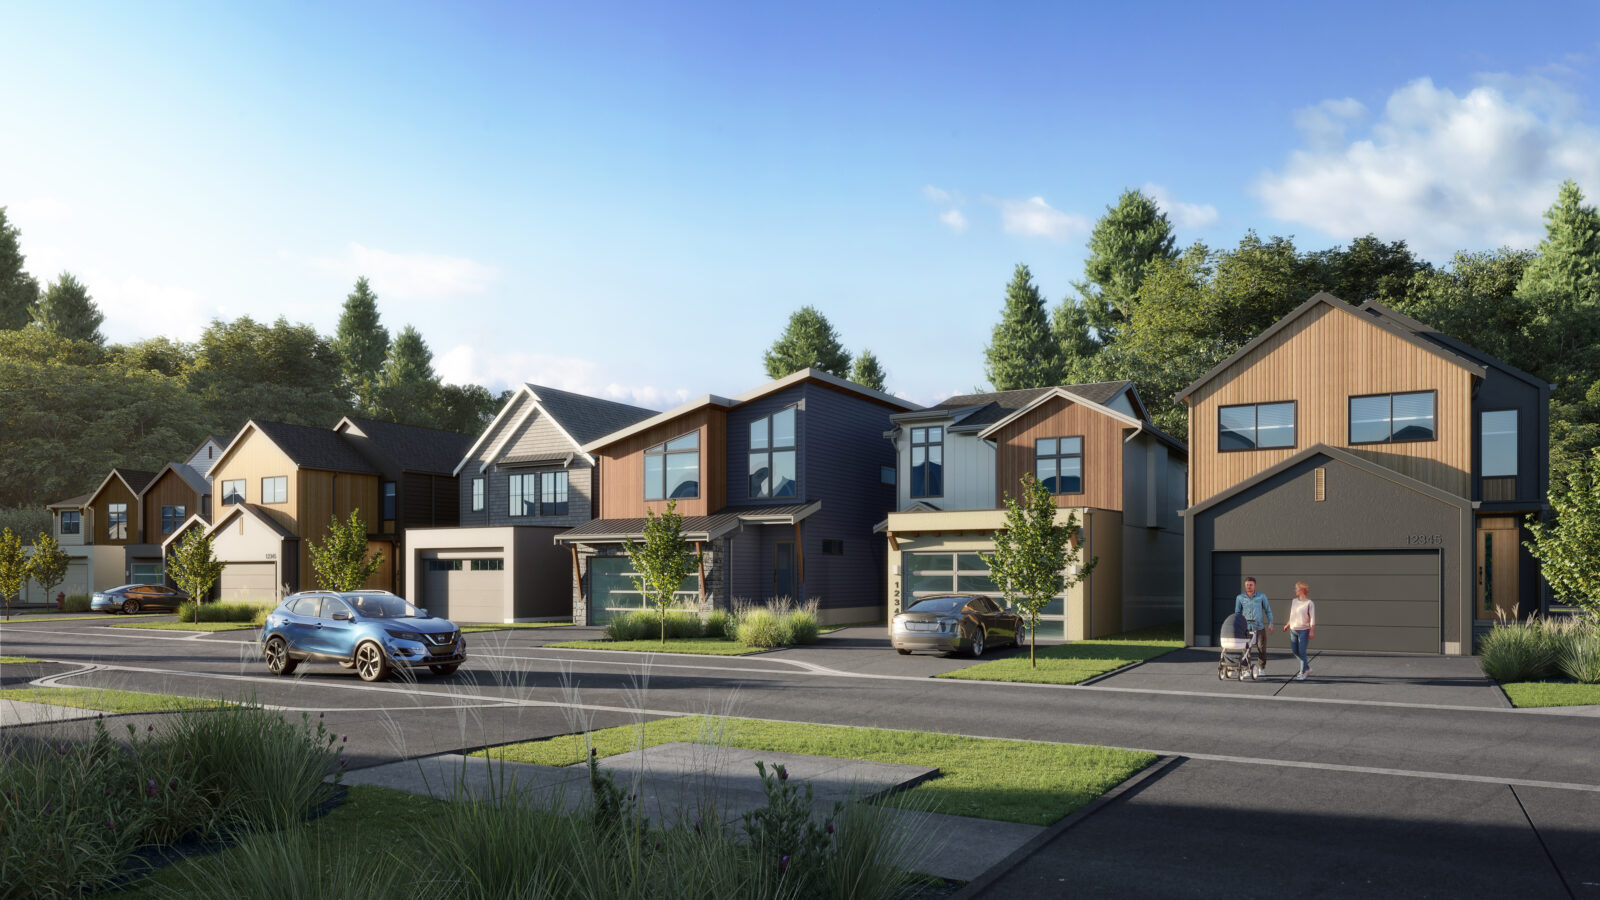 A new Colwood community of 74 single-family detached homes.